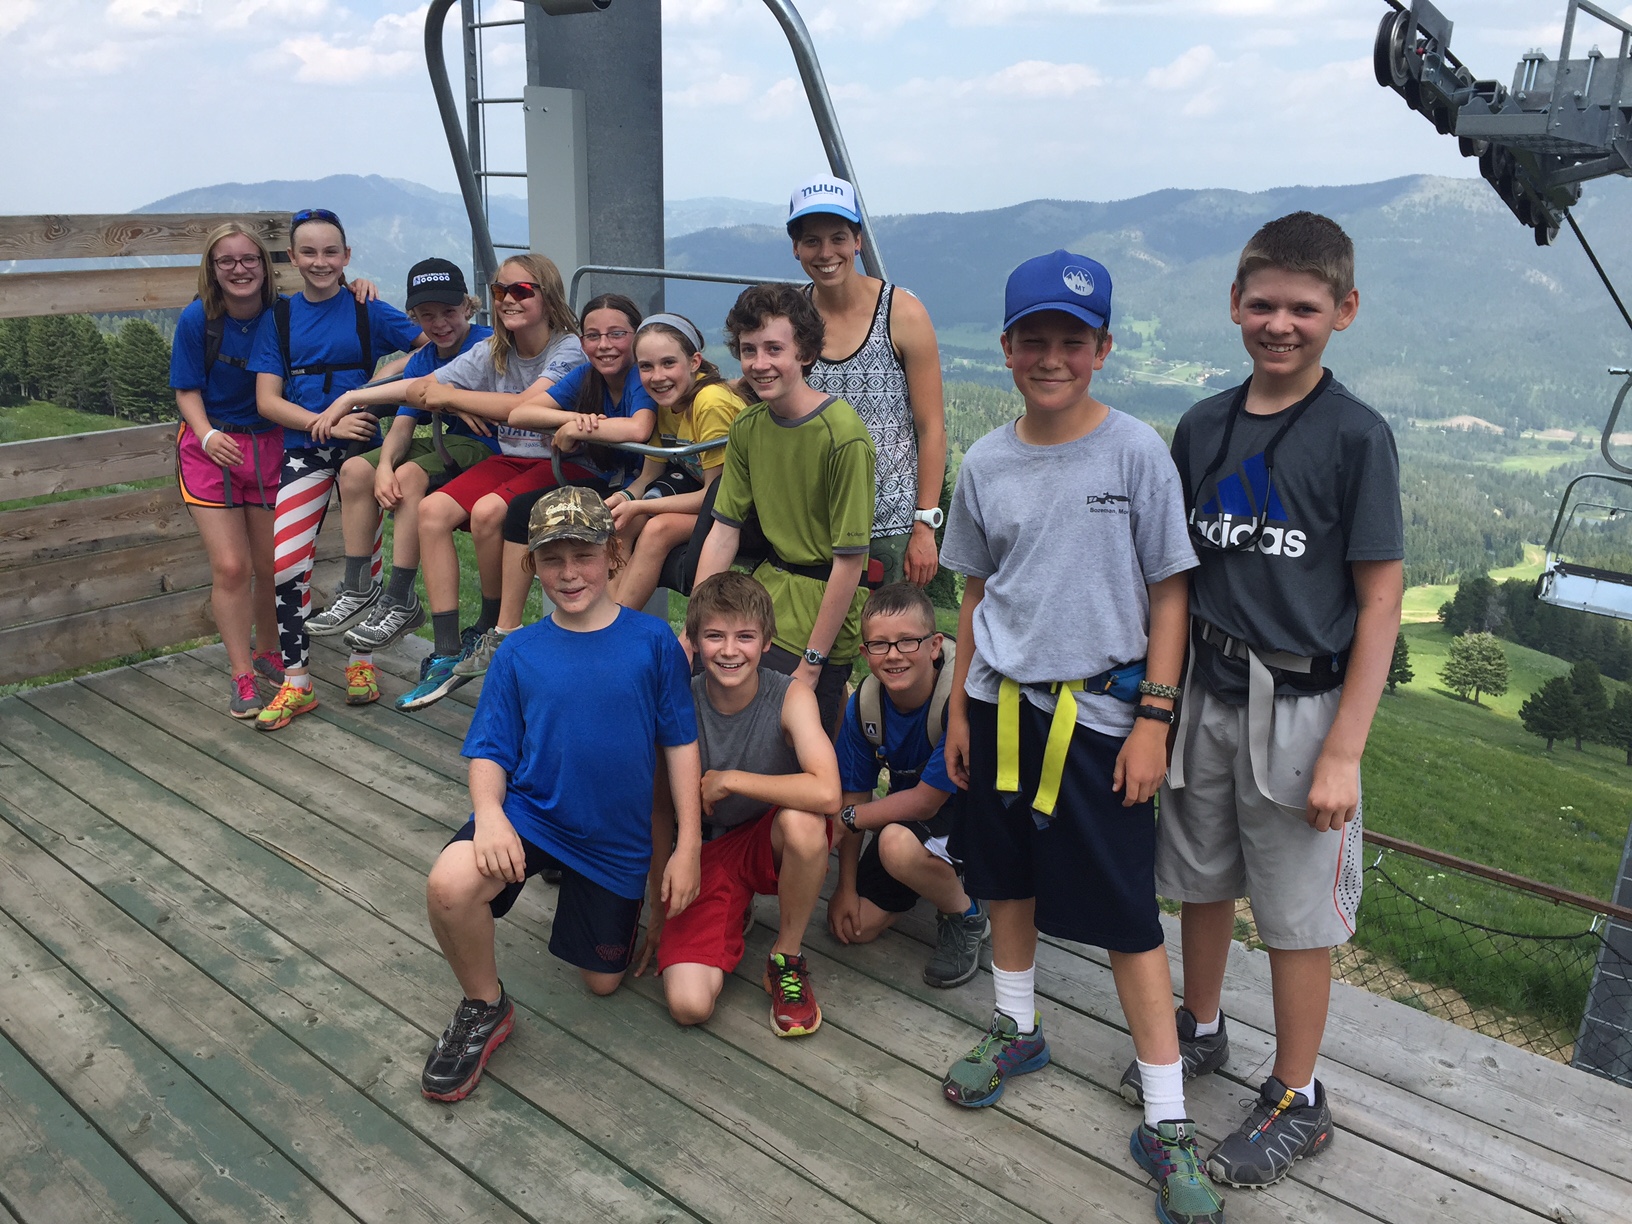 Corrine Malcolm (standing in Nuun hat) with some of her athletes after a Bridger Biathlon Club practice this summer. (Photo courtesy of Corrine Malcolm)